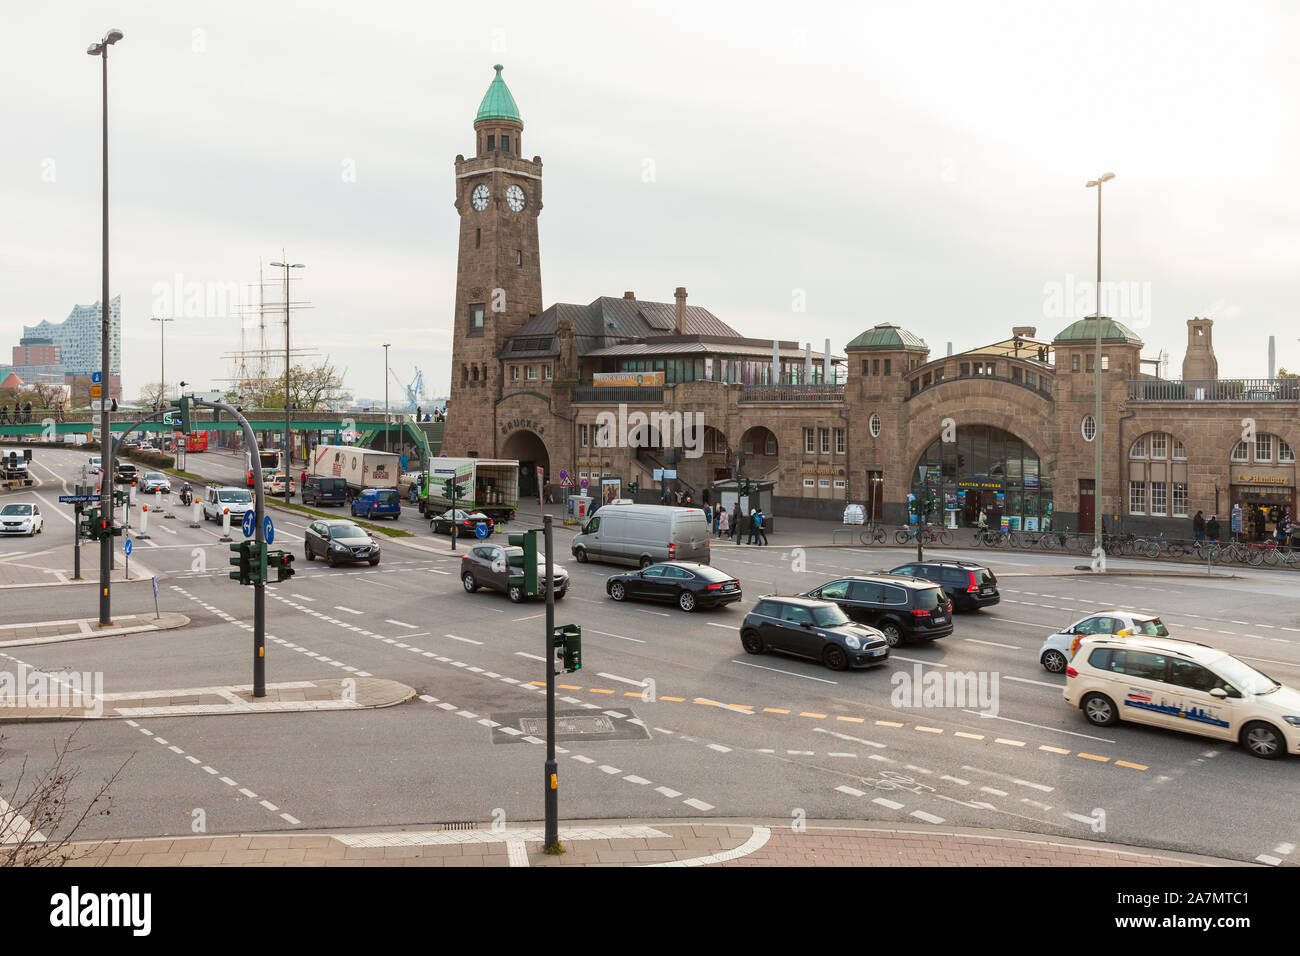 Hamburg, Germany - November 30, 2018: Port of Hamburg view with the Clocktower at Landungsbruecken at daytime, ordinary people and cars are on the str Stock Photo